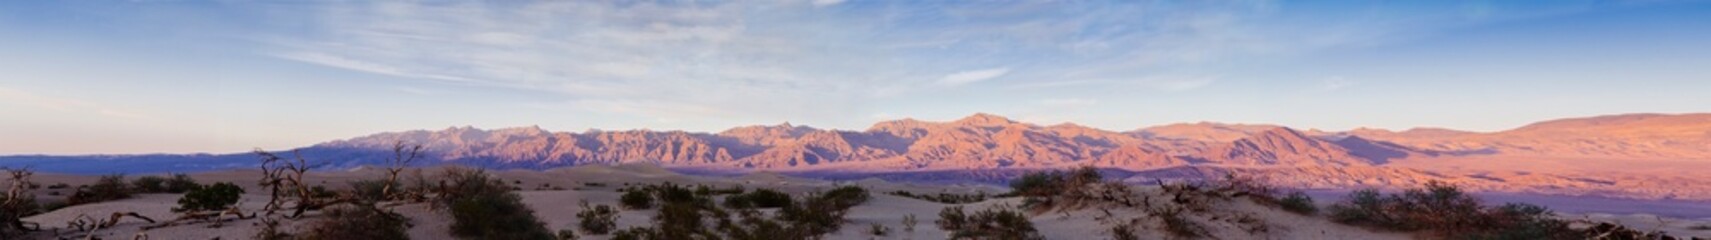 Dunes in the desert of Death Valley at sunset - 471868110